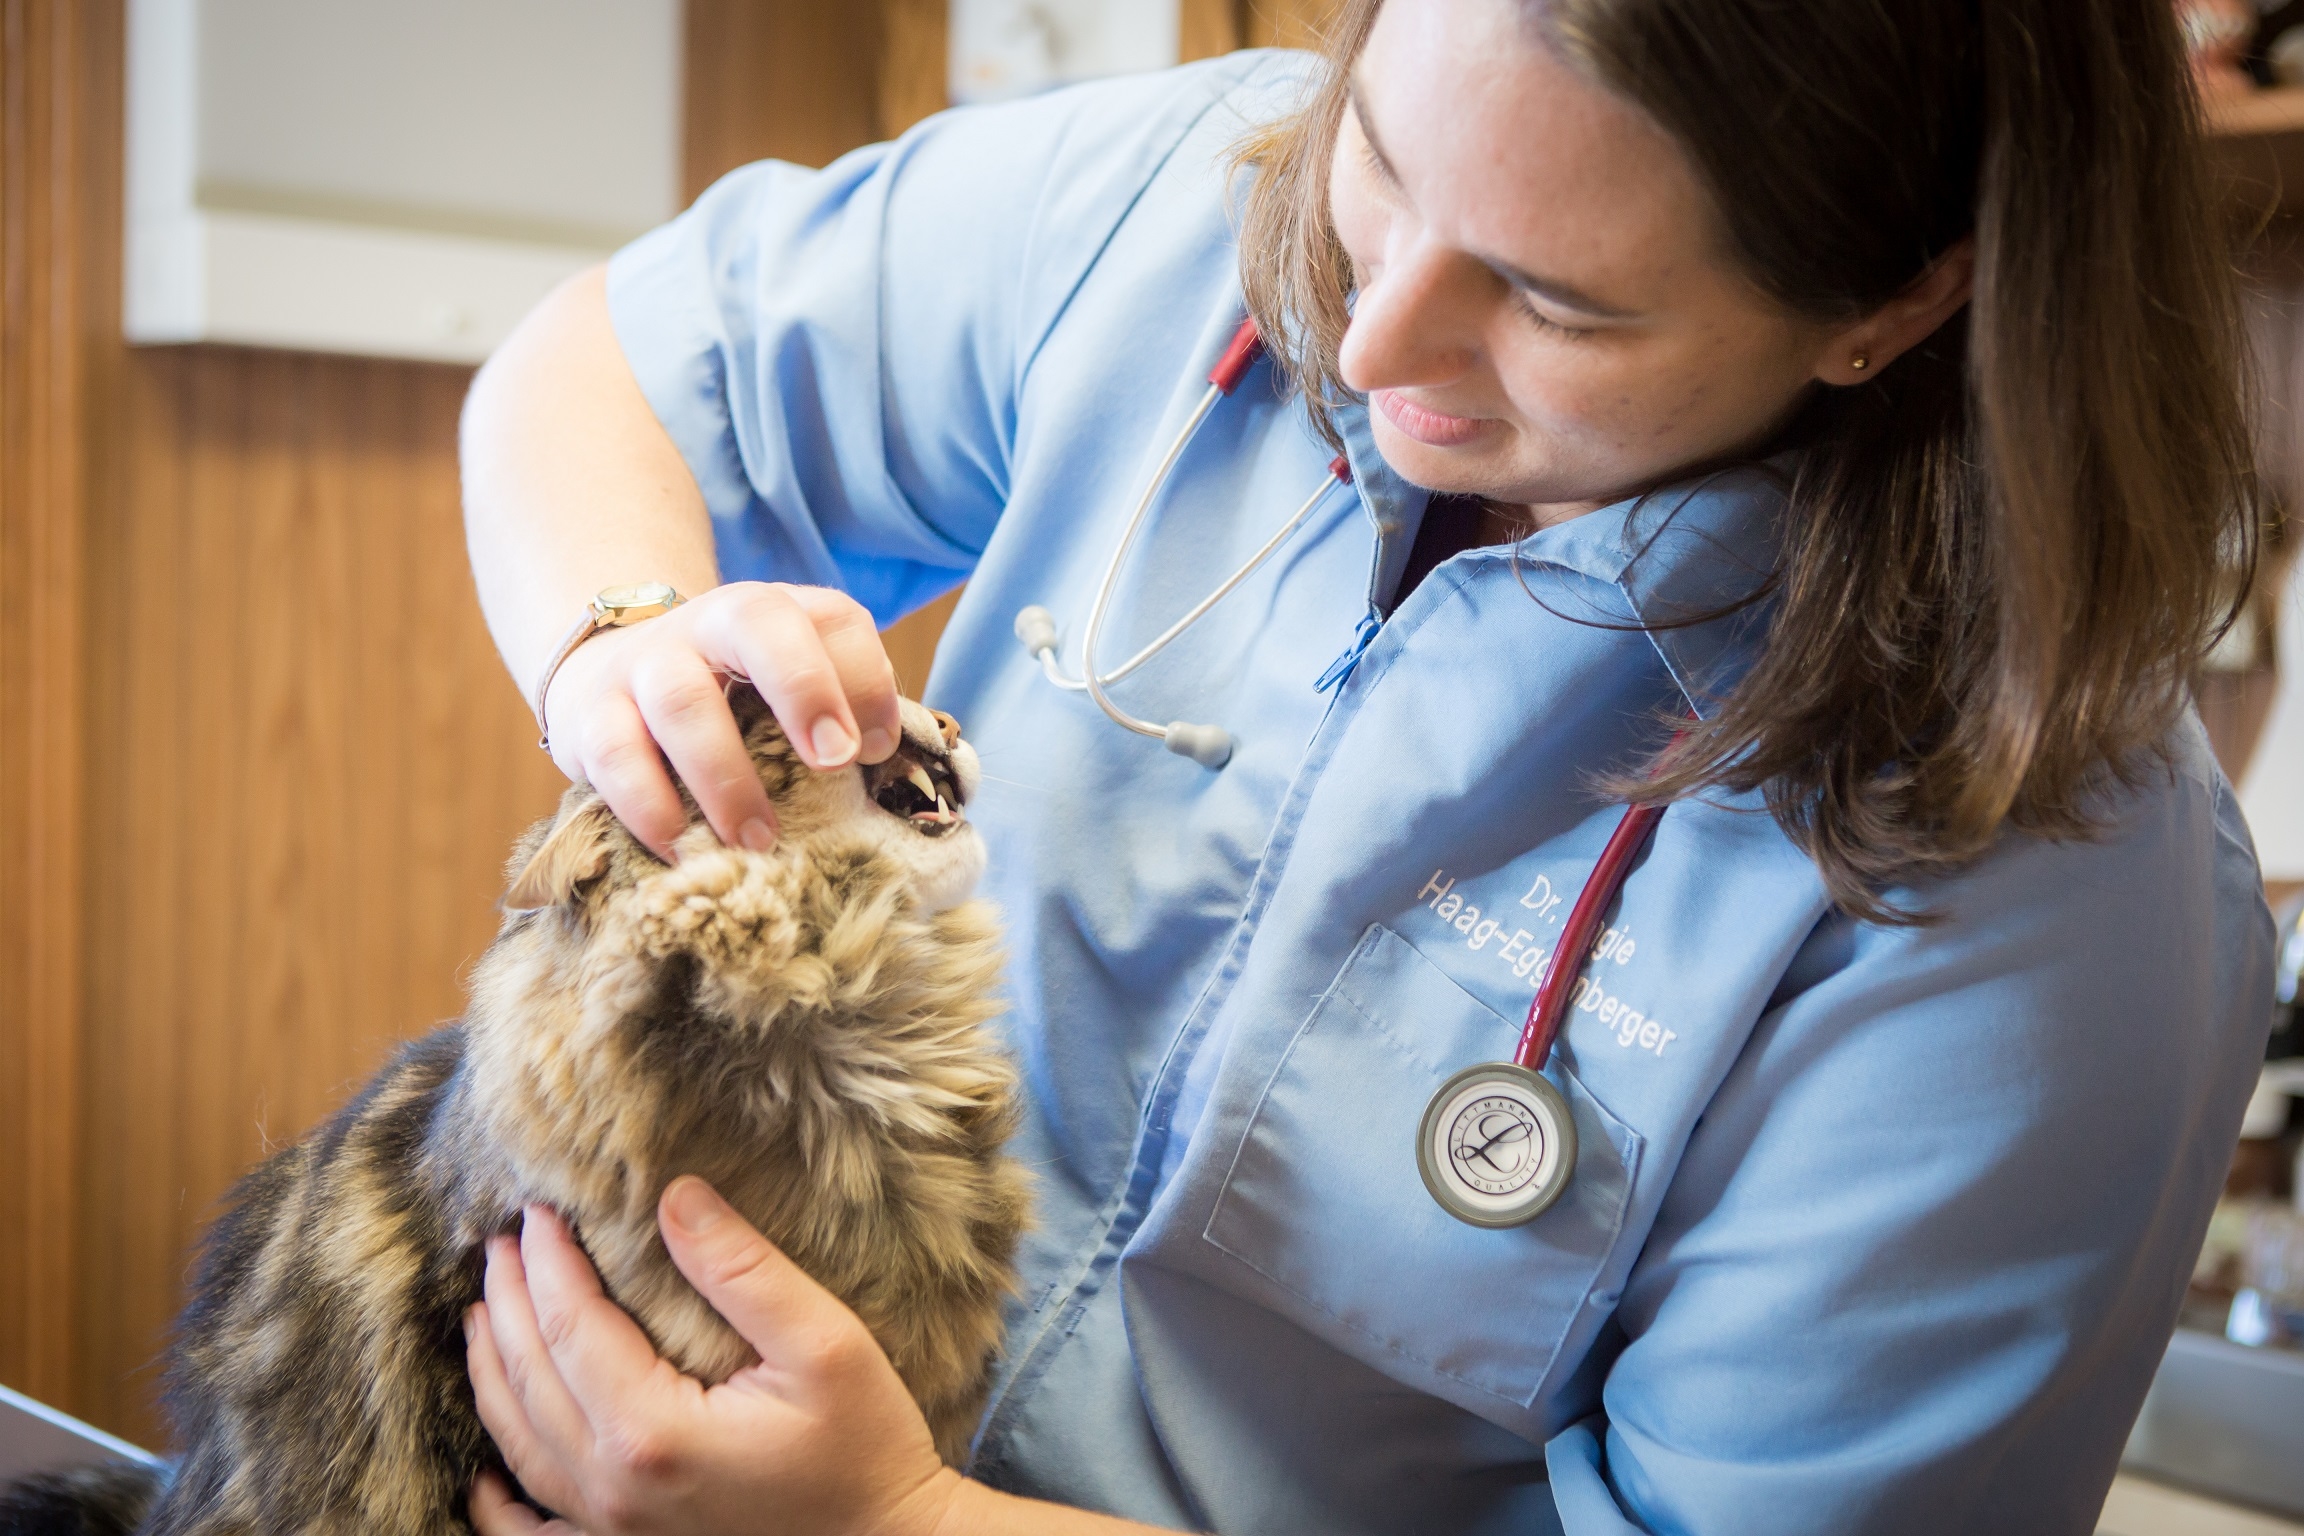 Dr. Haag-Eggenberger examines a cat's teeth for signs of dental disease during an annual wellness exam.